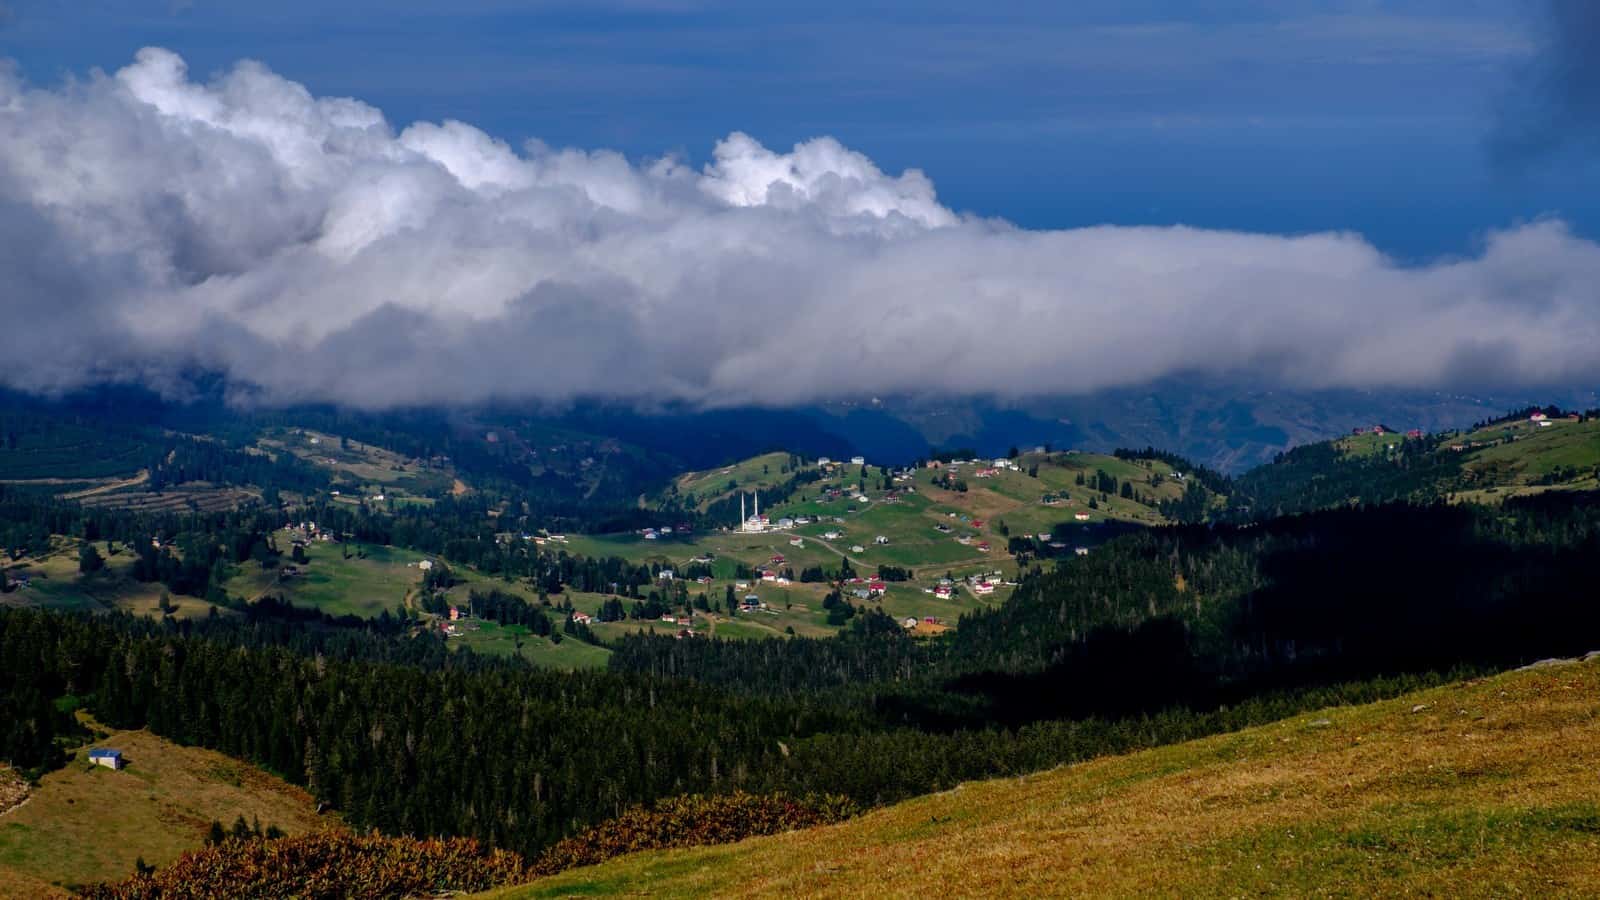 1581254310 30 The most beautiful pictures of the Trabzon region in Turkey - The most beautiful pictures of the Trabzon region in Turkey for tourism and entertainment